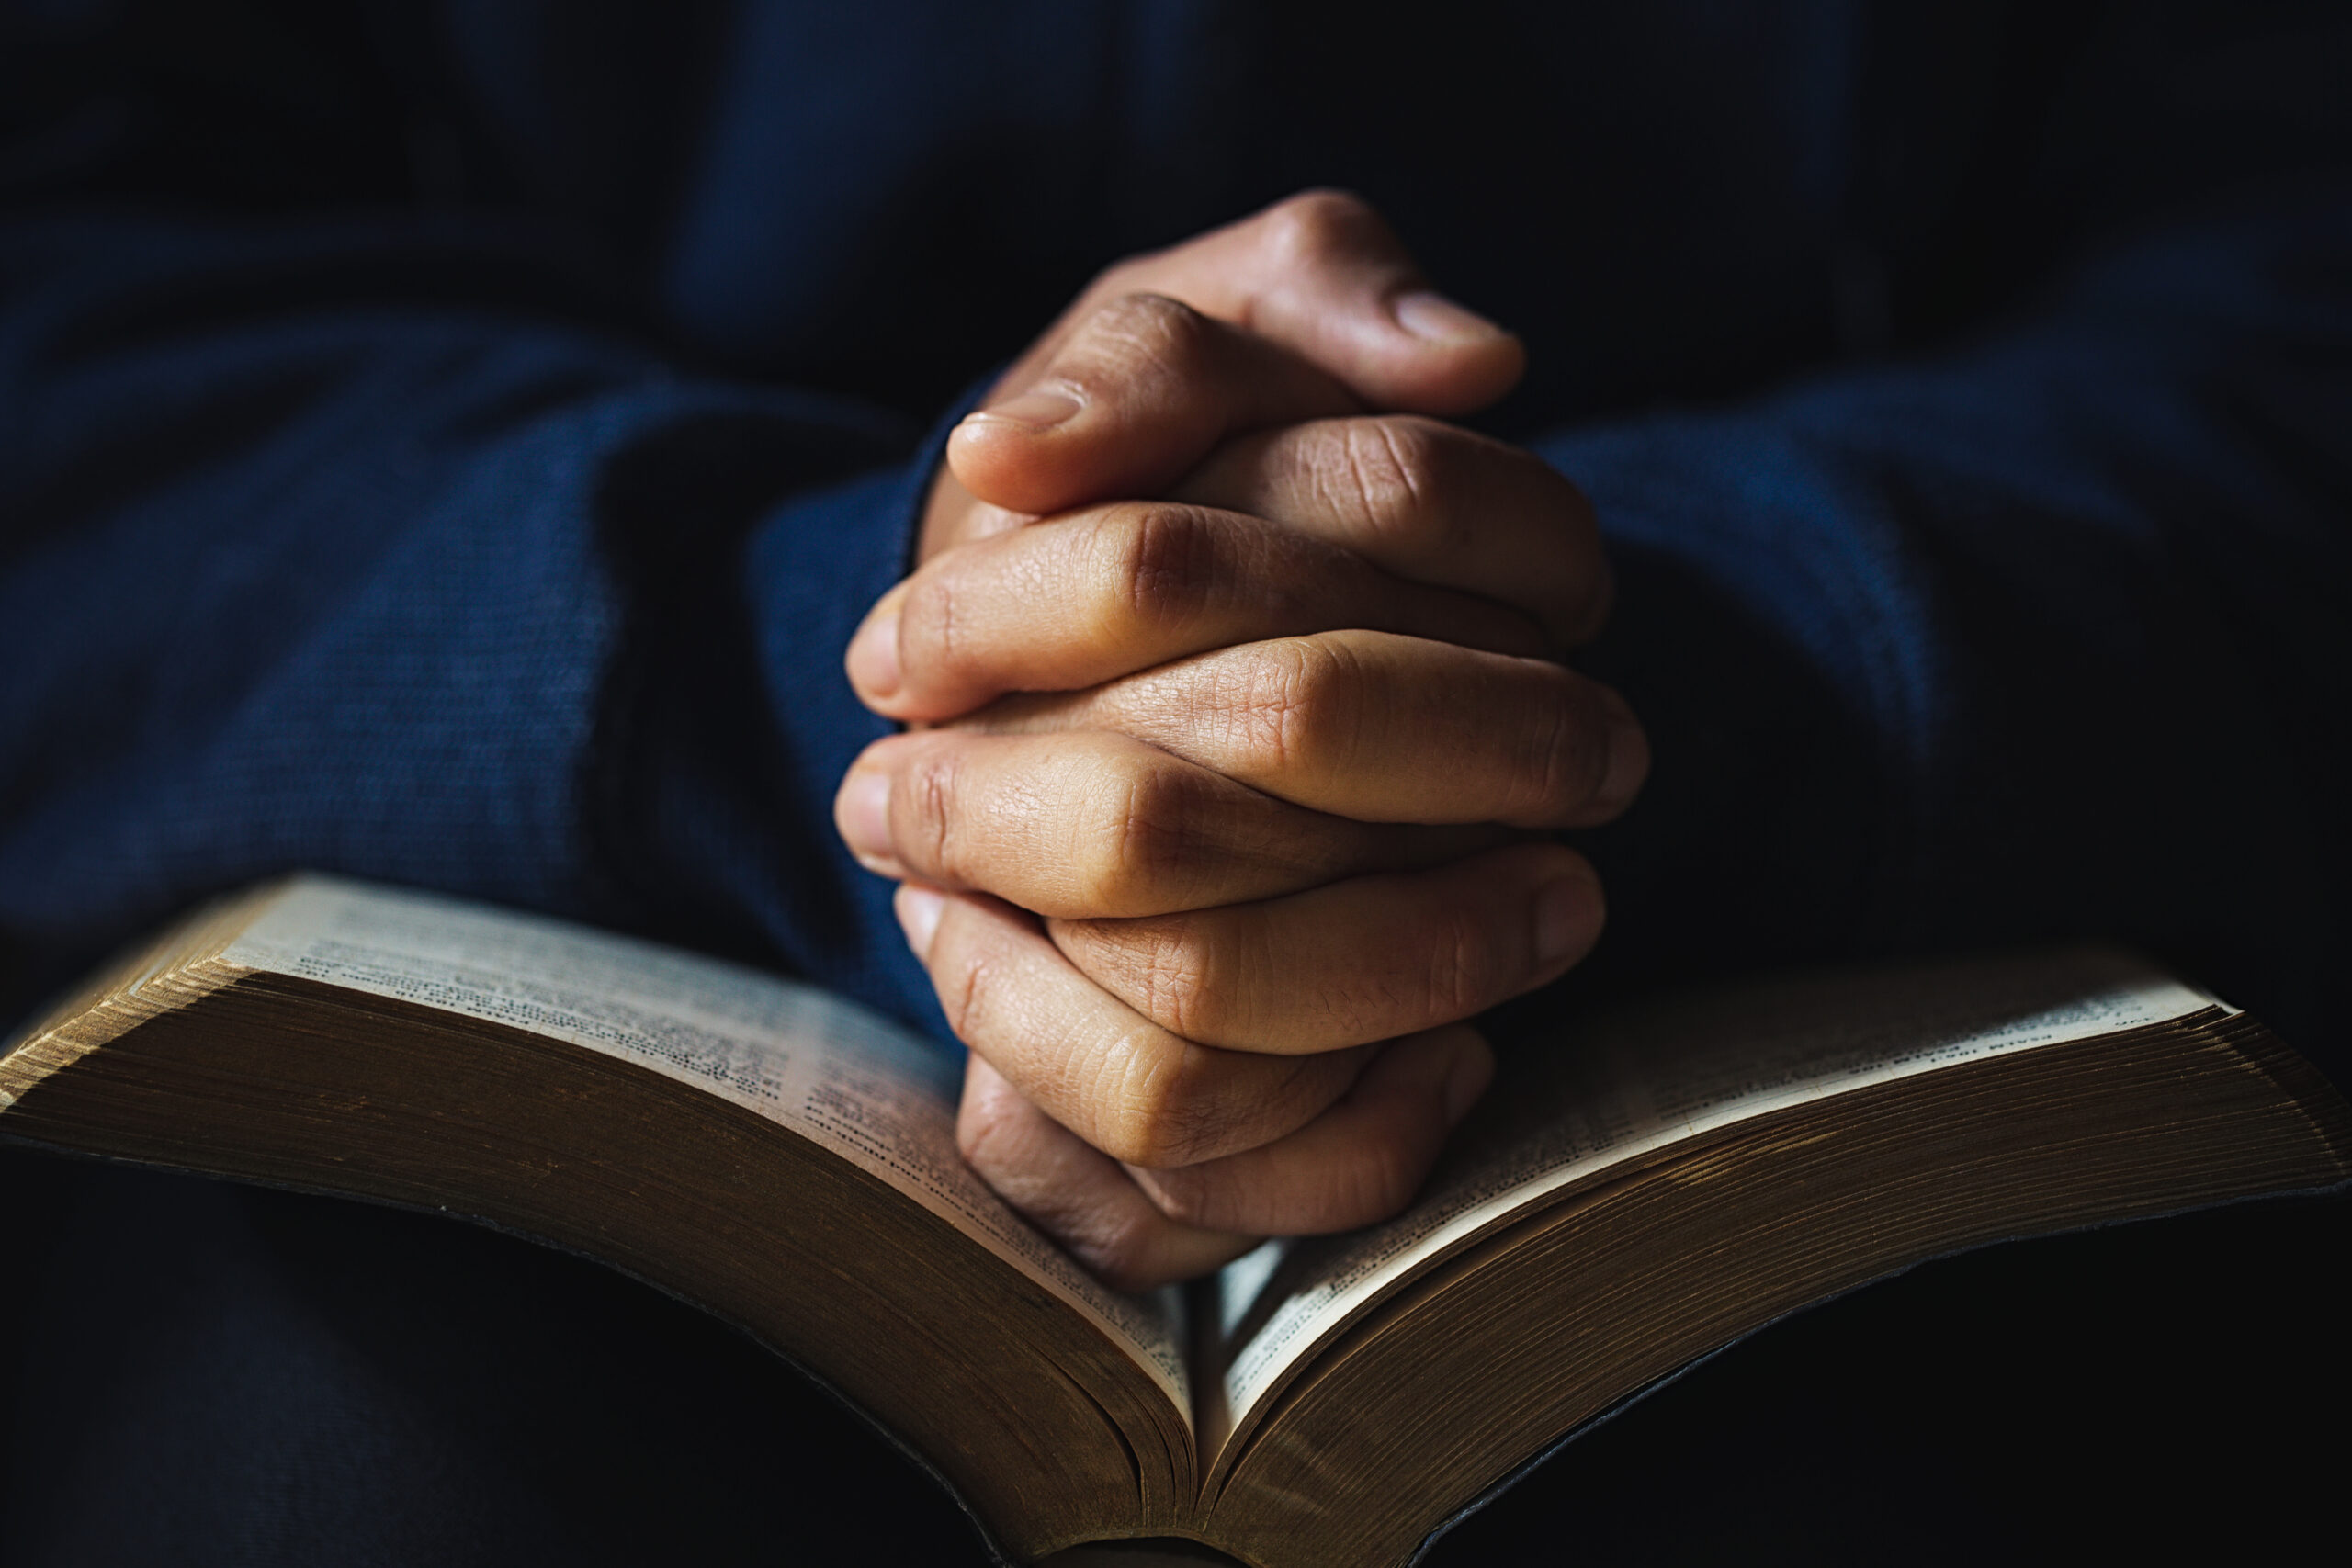 Delve into Saint Alphonsus Liguori's wisdom on using everyday events to glorify God and connect the soul with His divine plan. Learn about God's will to bestow blessings and spiritual purification upon us.